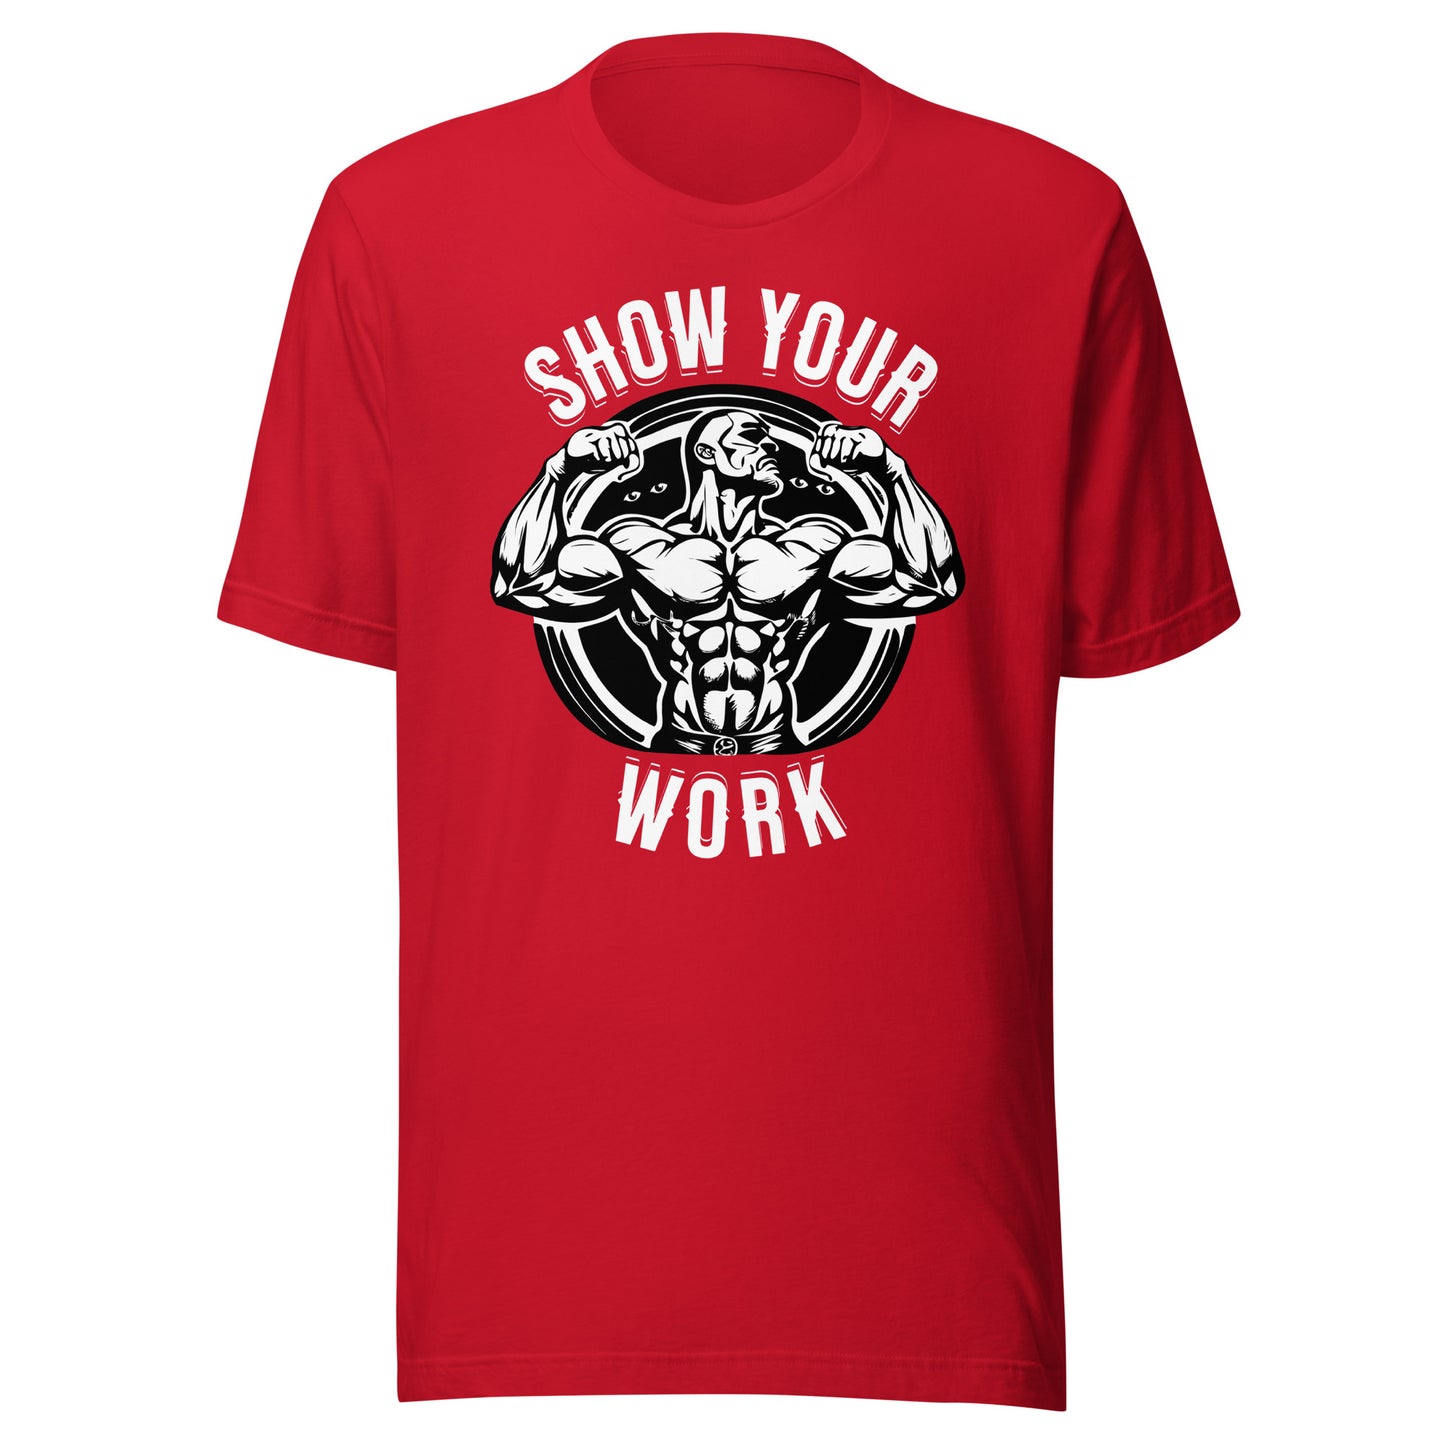 Show Your Work Unisex t-shirt